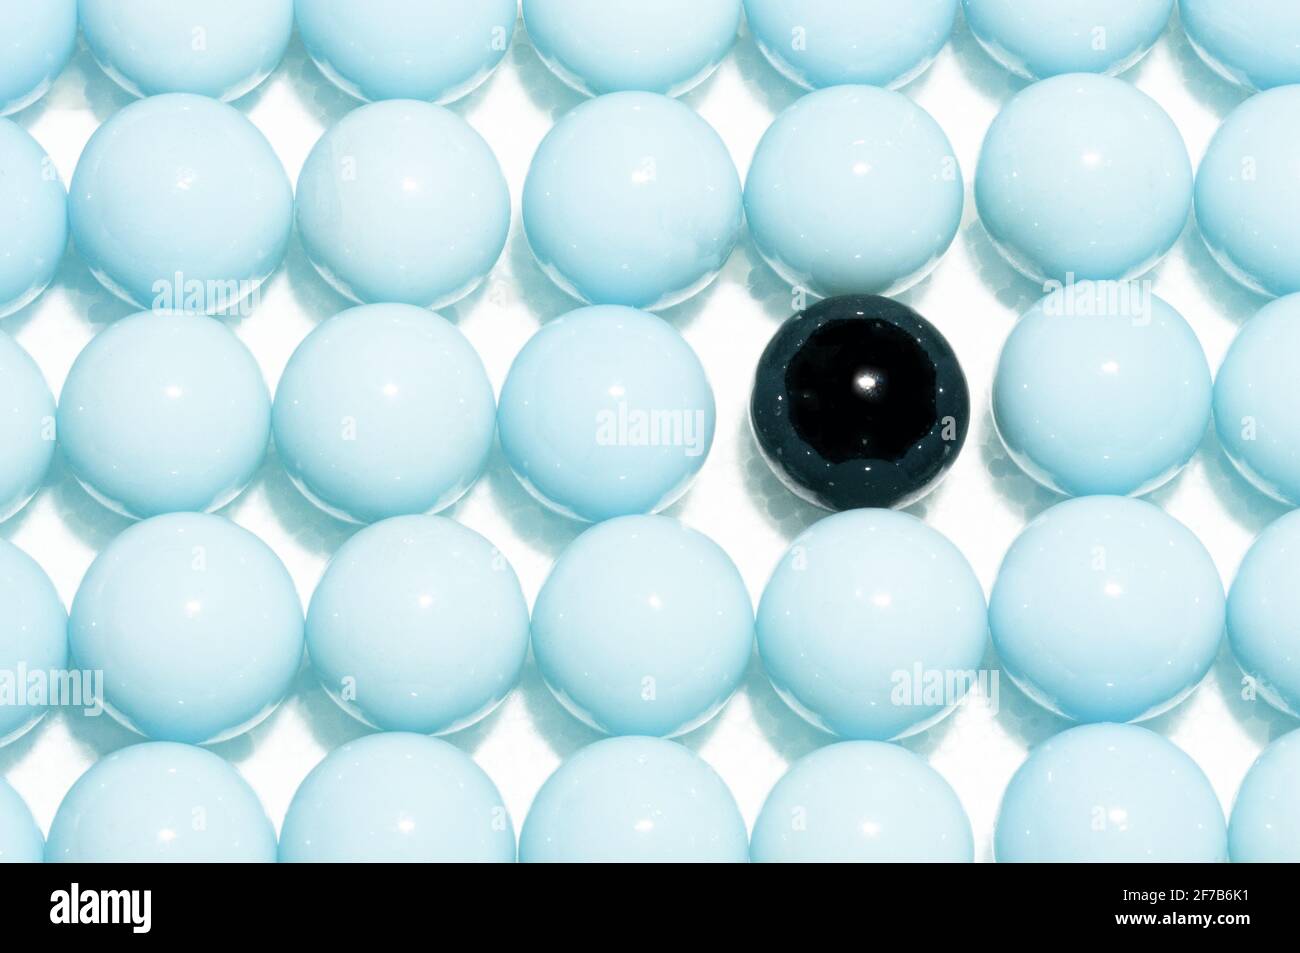 Lone black pearl in white glass spheres background Stock Photo